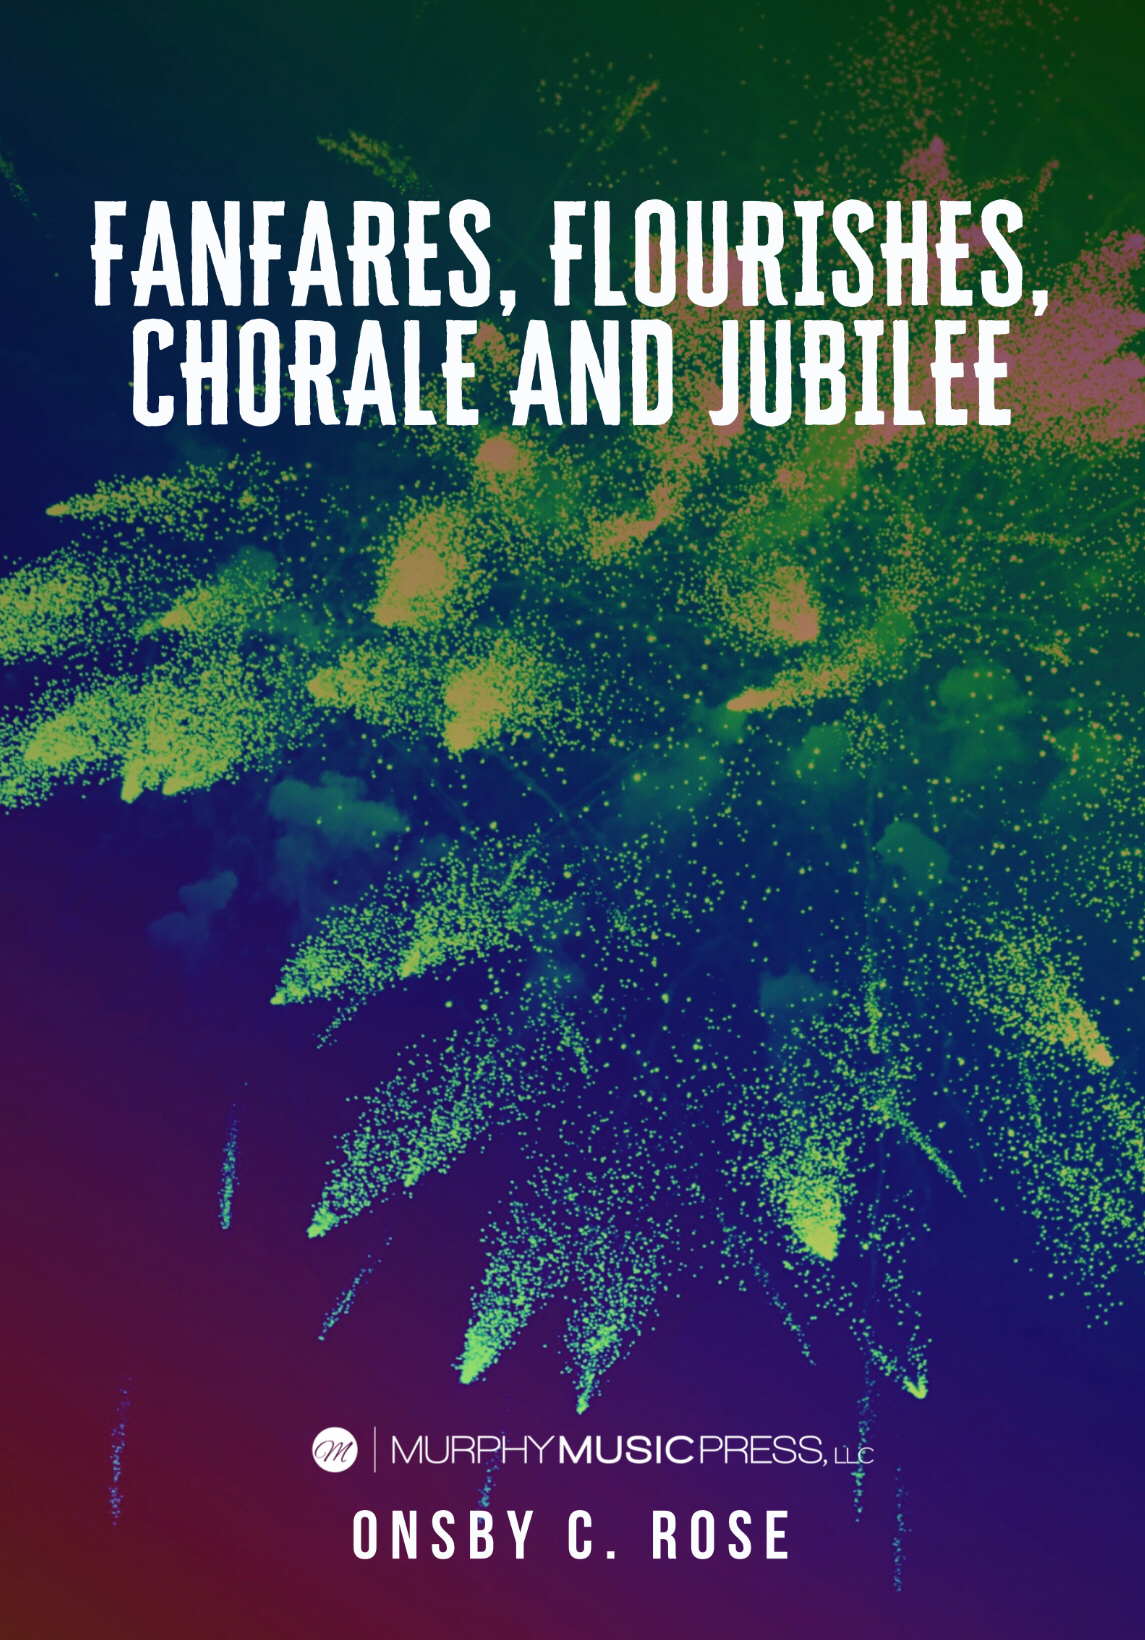 Fanfare, Flourishes, Chorale, And Jubilee (Score Only) by Onsby C. Rose